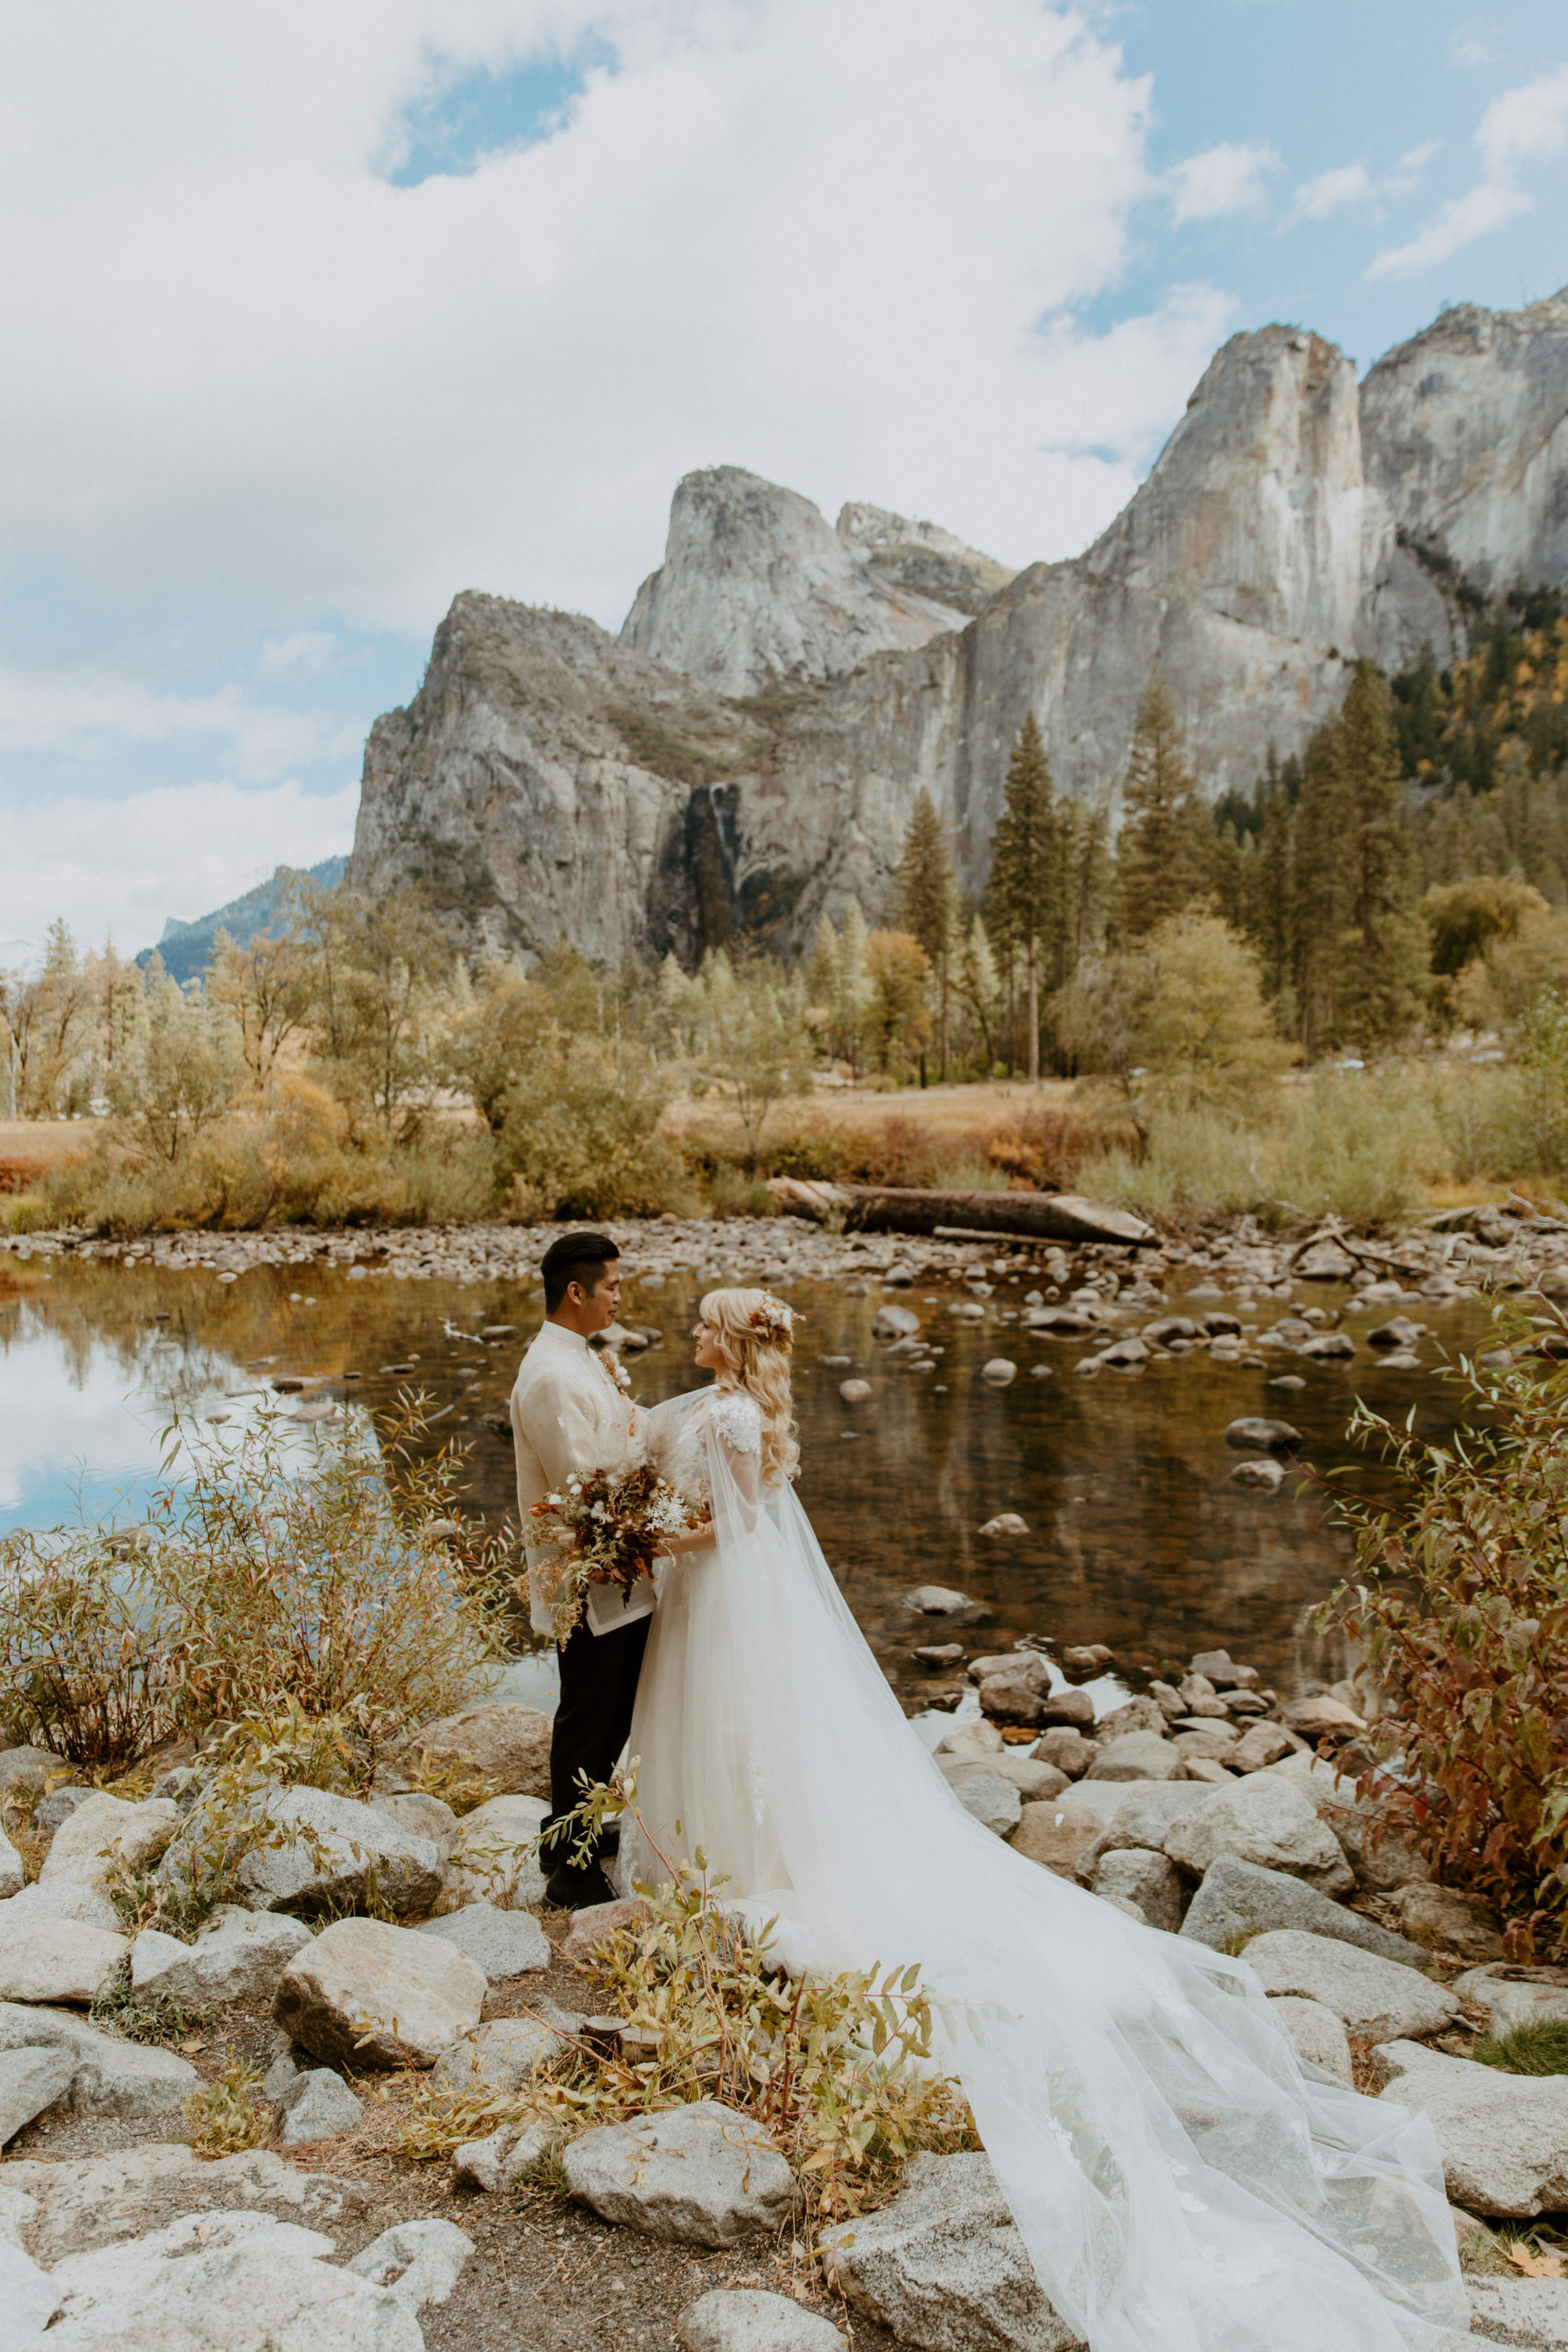 the couple at their elopement in Yosemite